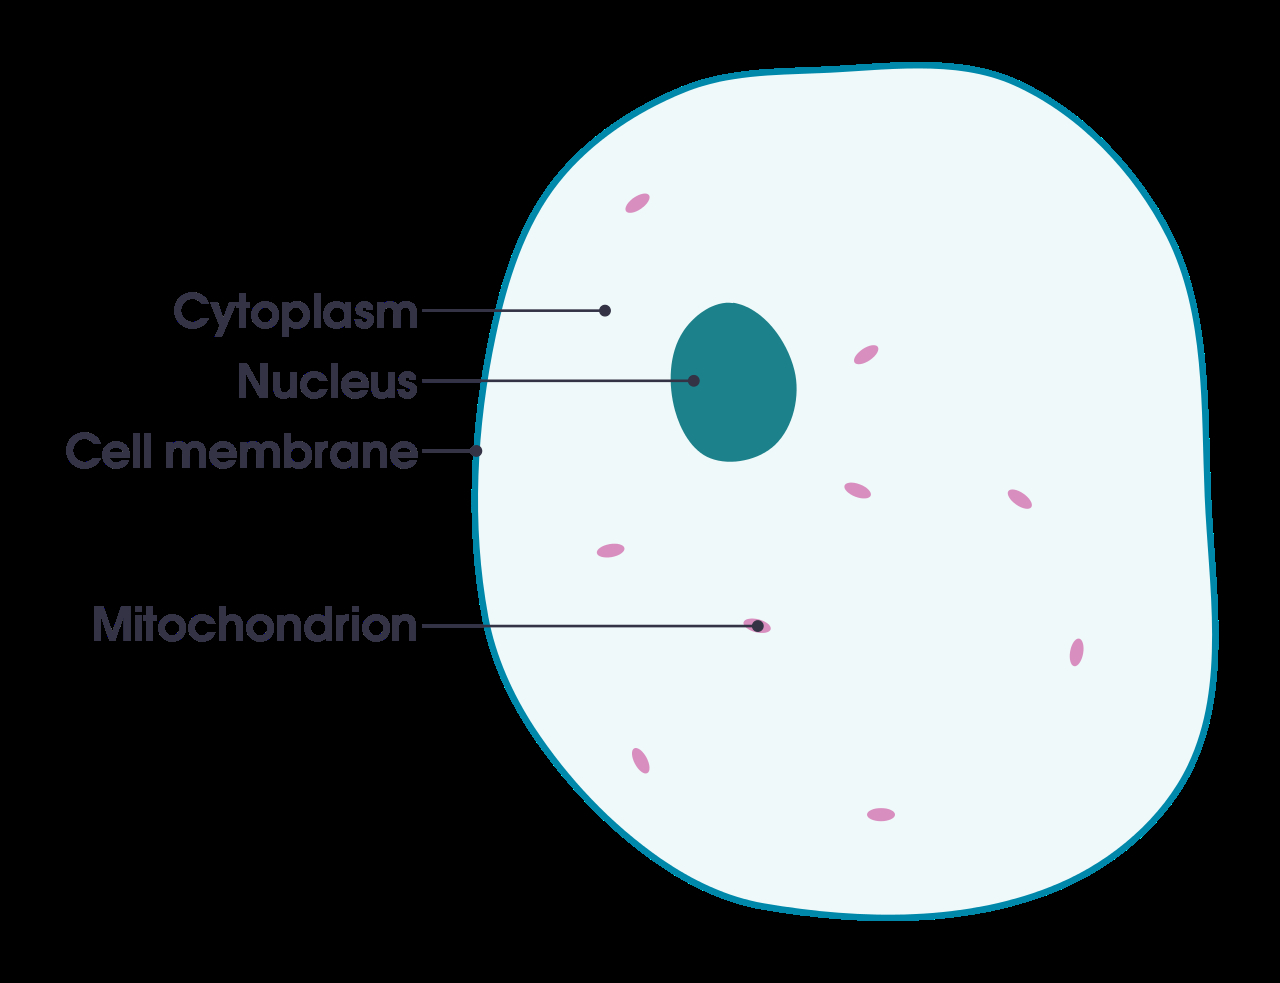 Plant And Animal Cell Diagram Filesimple Diagram Of Animal Cell Ensvg Wikimedia Commons